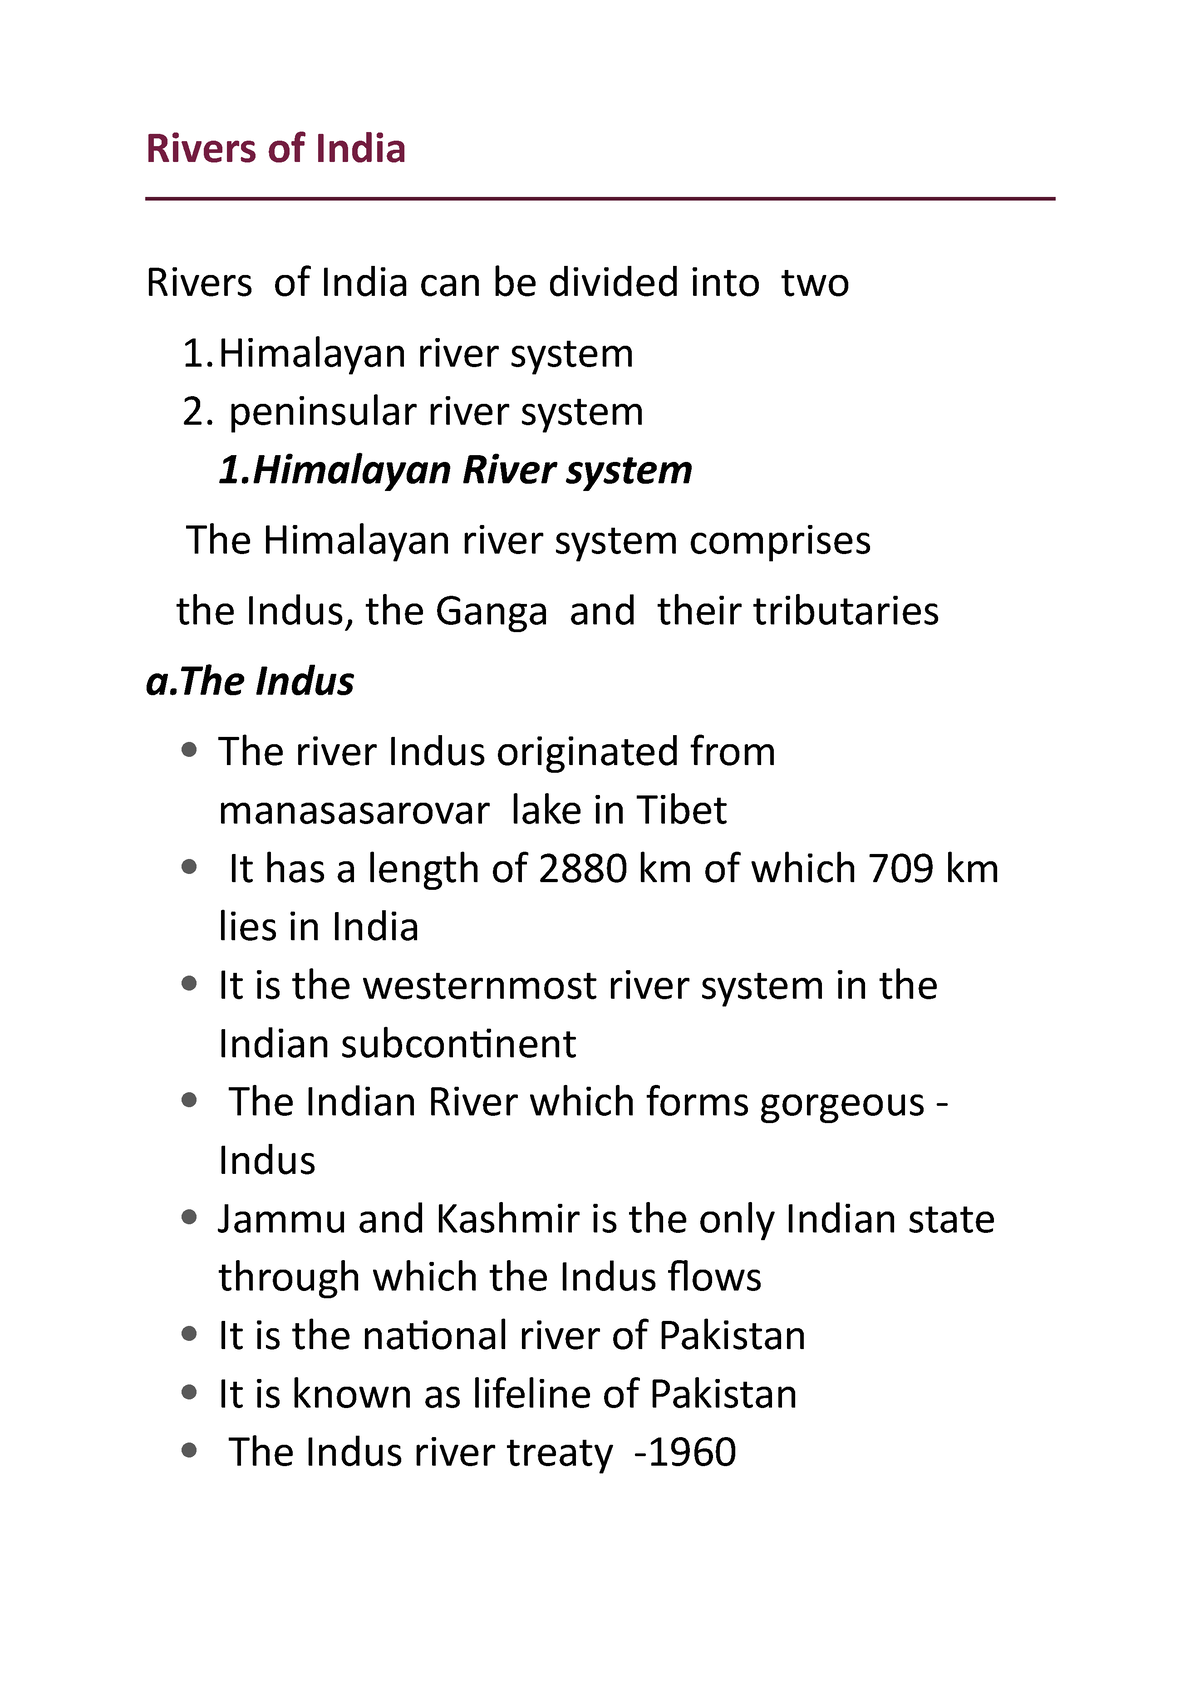 indian rivers essay